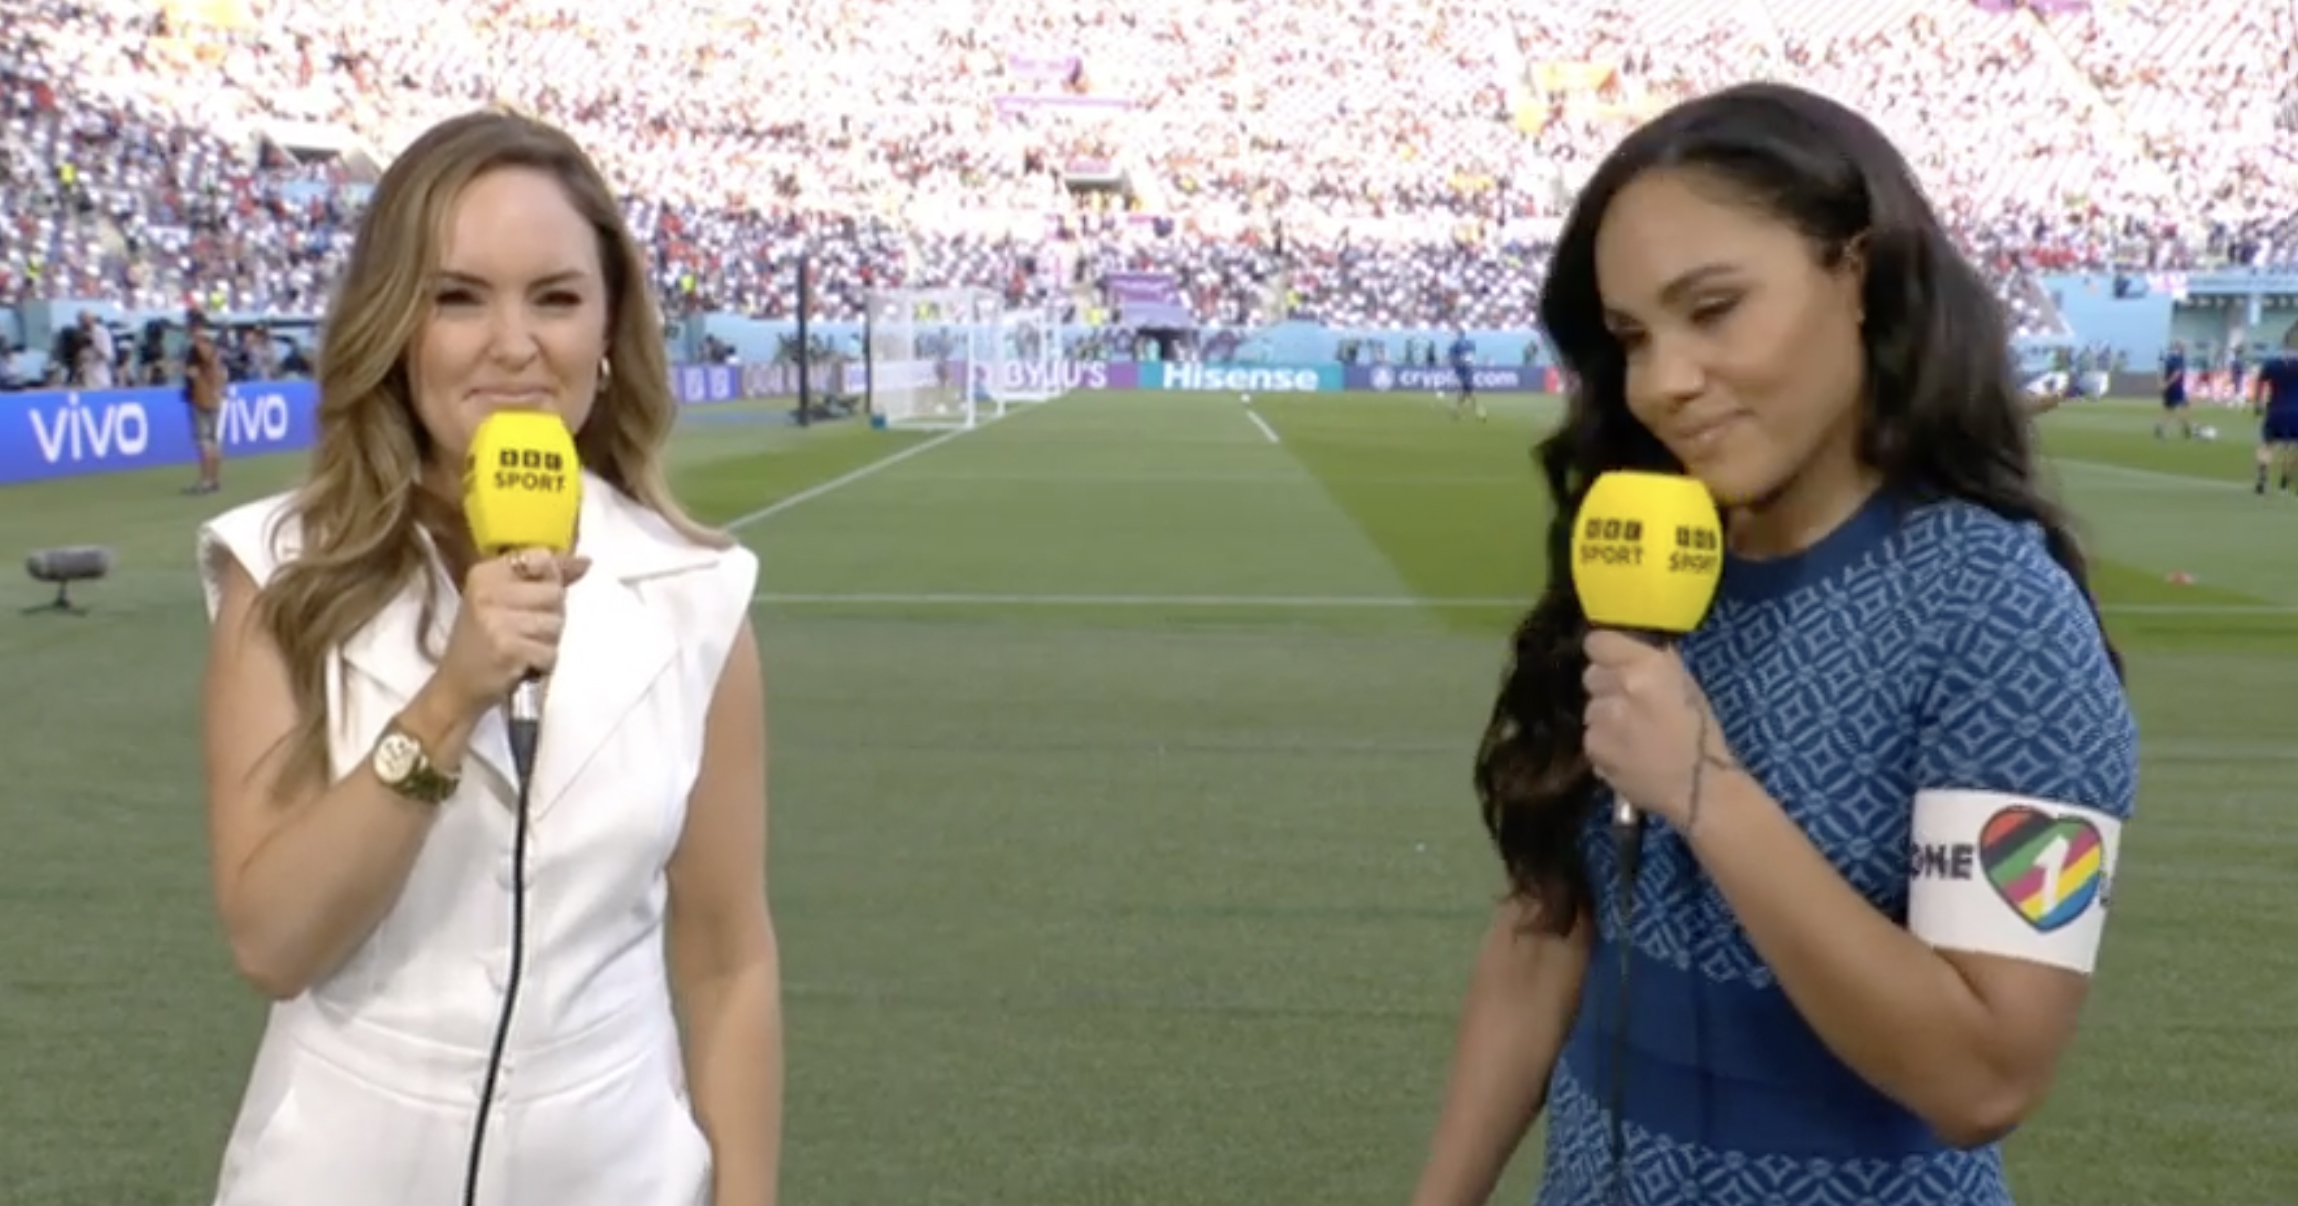 World Cup 2022 Alex Scott protests FIFA armband decision live on the BBC FourFourTwo